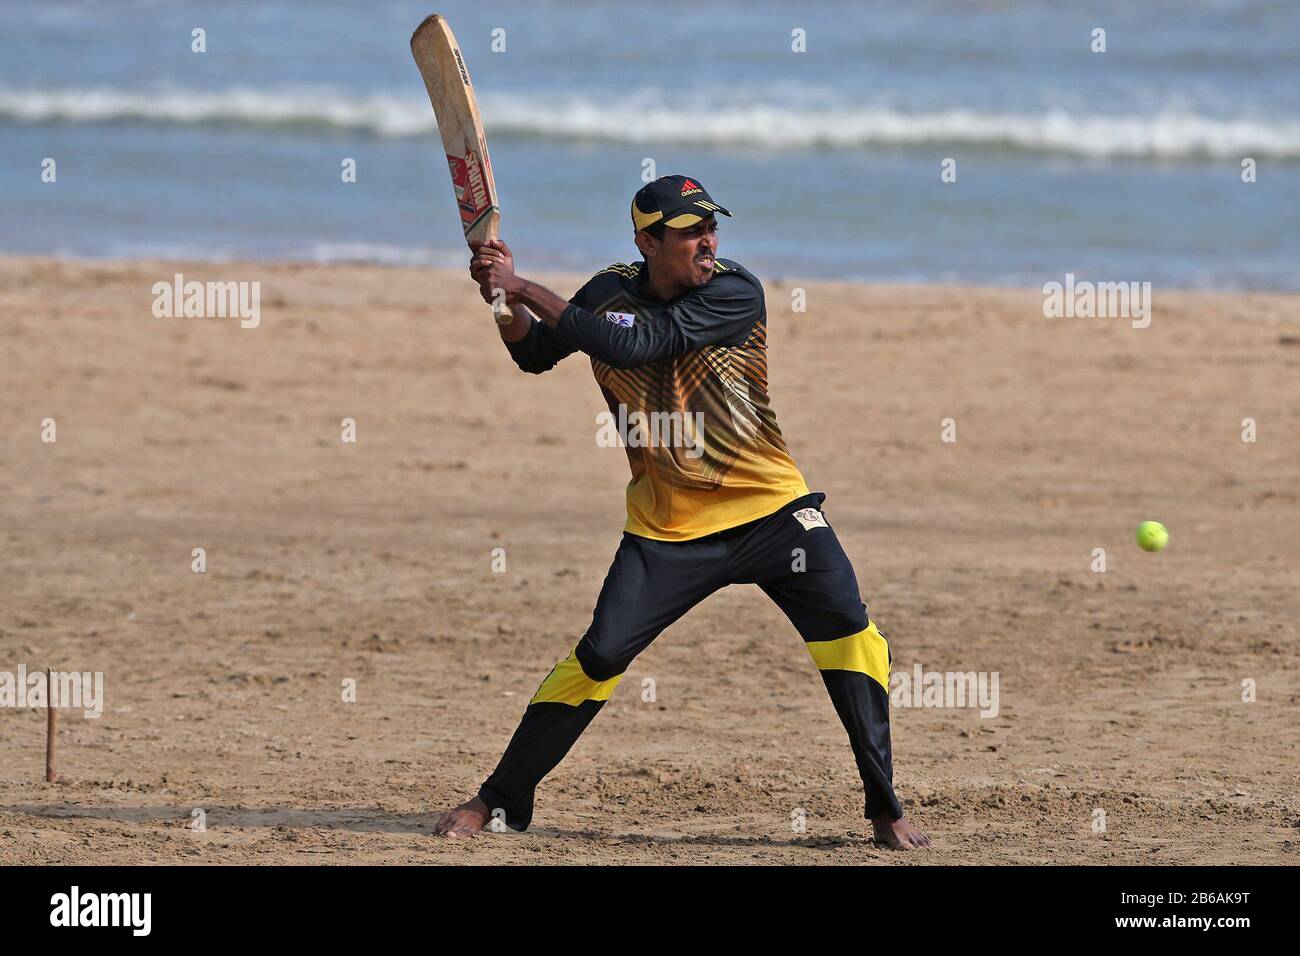 Galle, Sri Lanka. 01st Jan, 2020. Sri Lankan cricket fans play on the beach  prior to the first test match between England and Sri Lanka, Sunday, March  8, 2020, at Galle, Sri